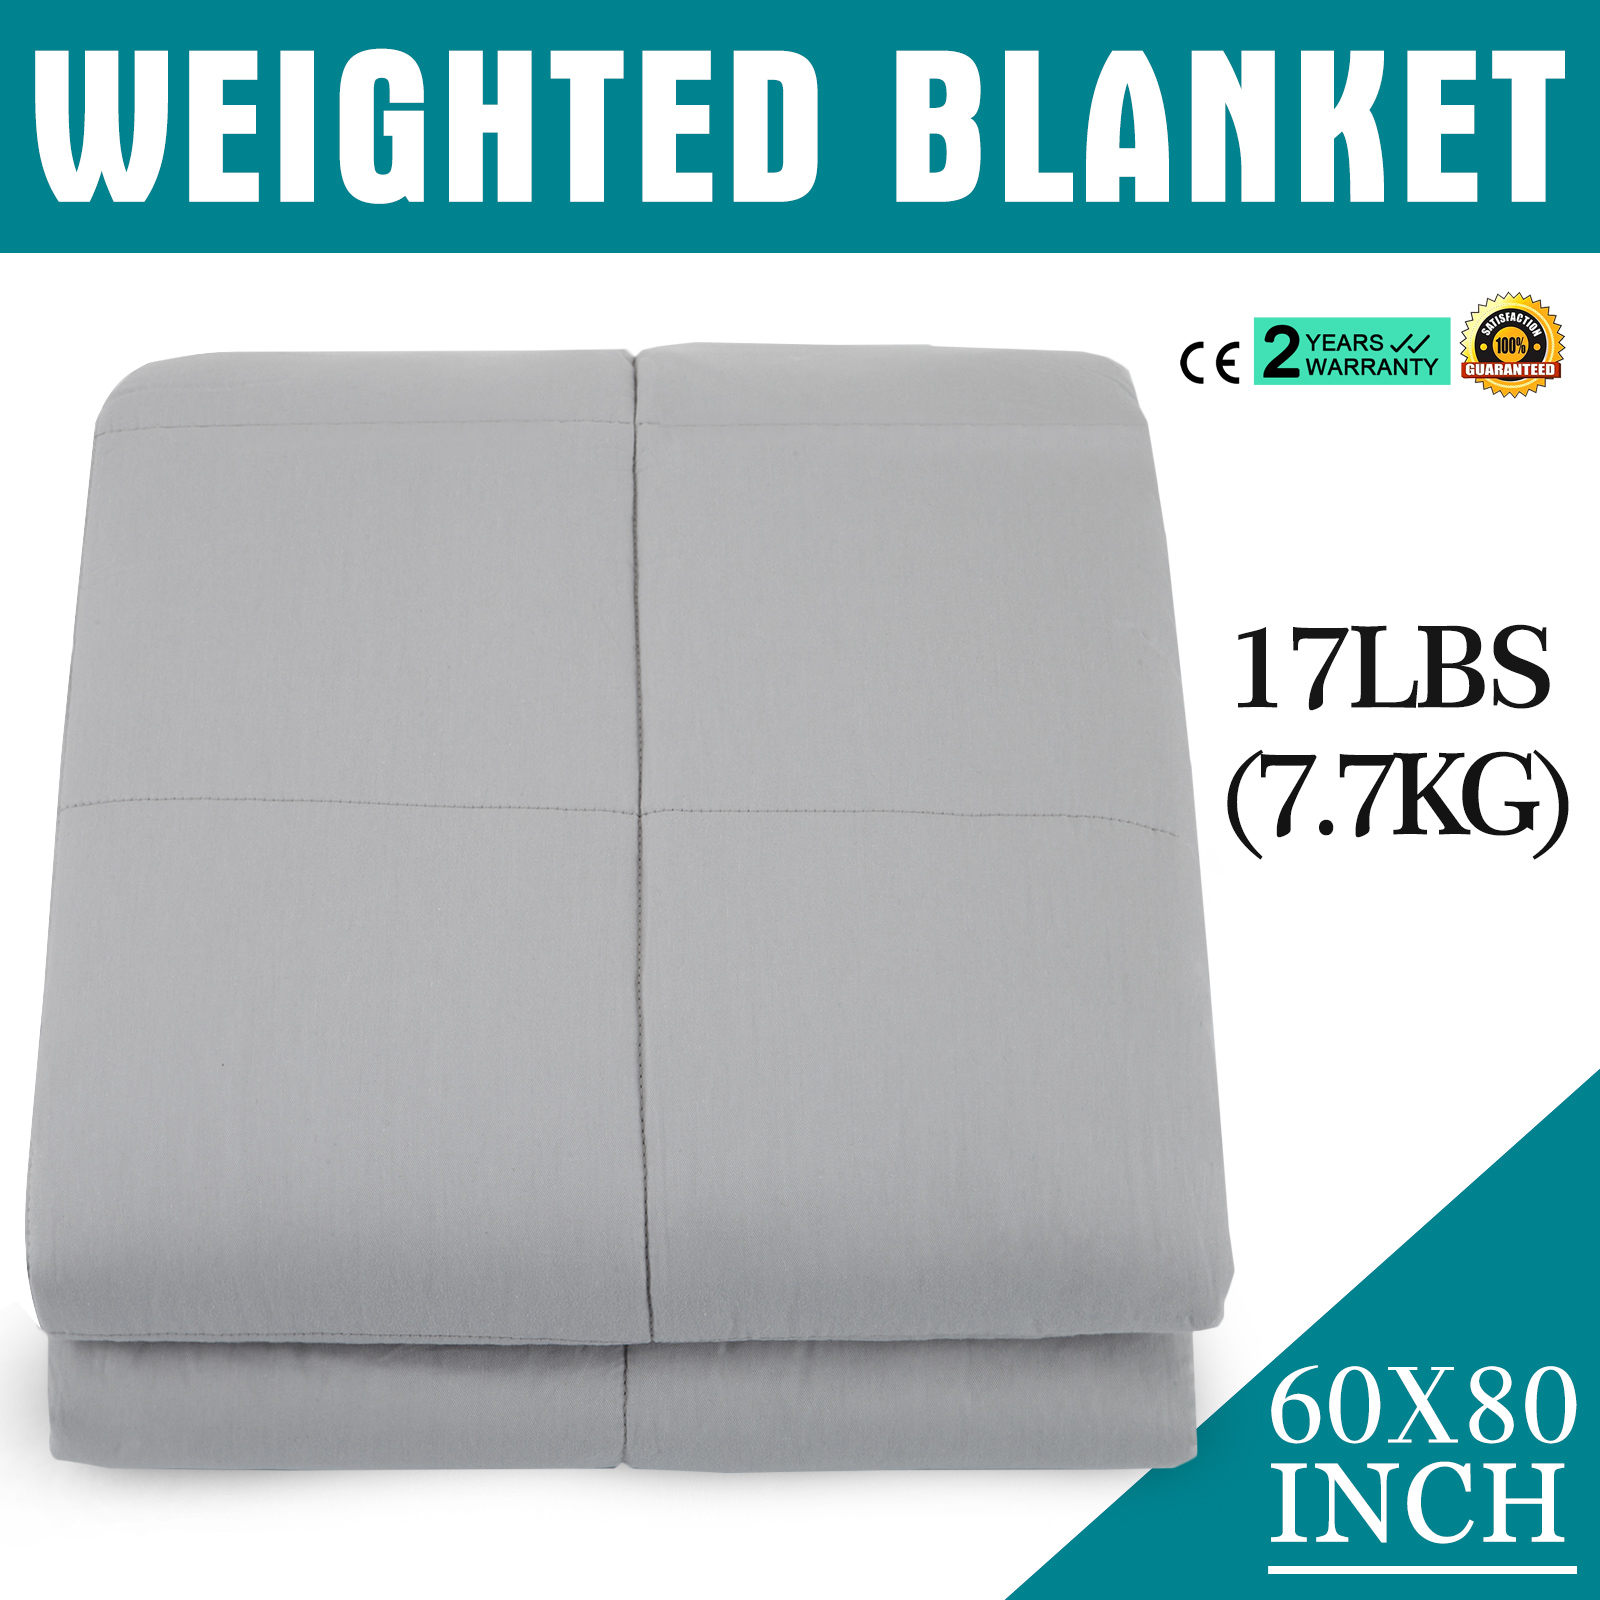 7.7KG Premium Weighted Heavy Blanket for Adults Kids Deep Relax Sleep